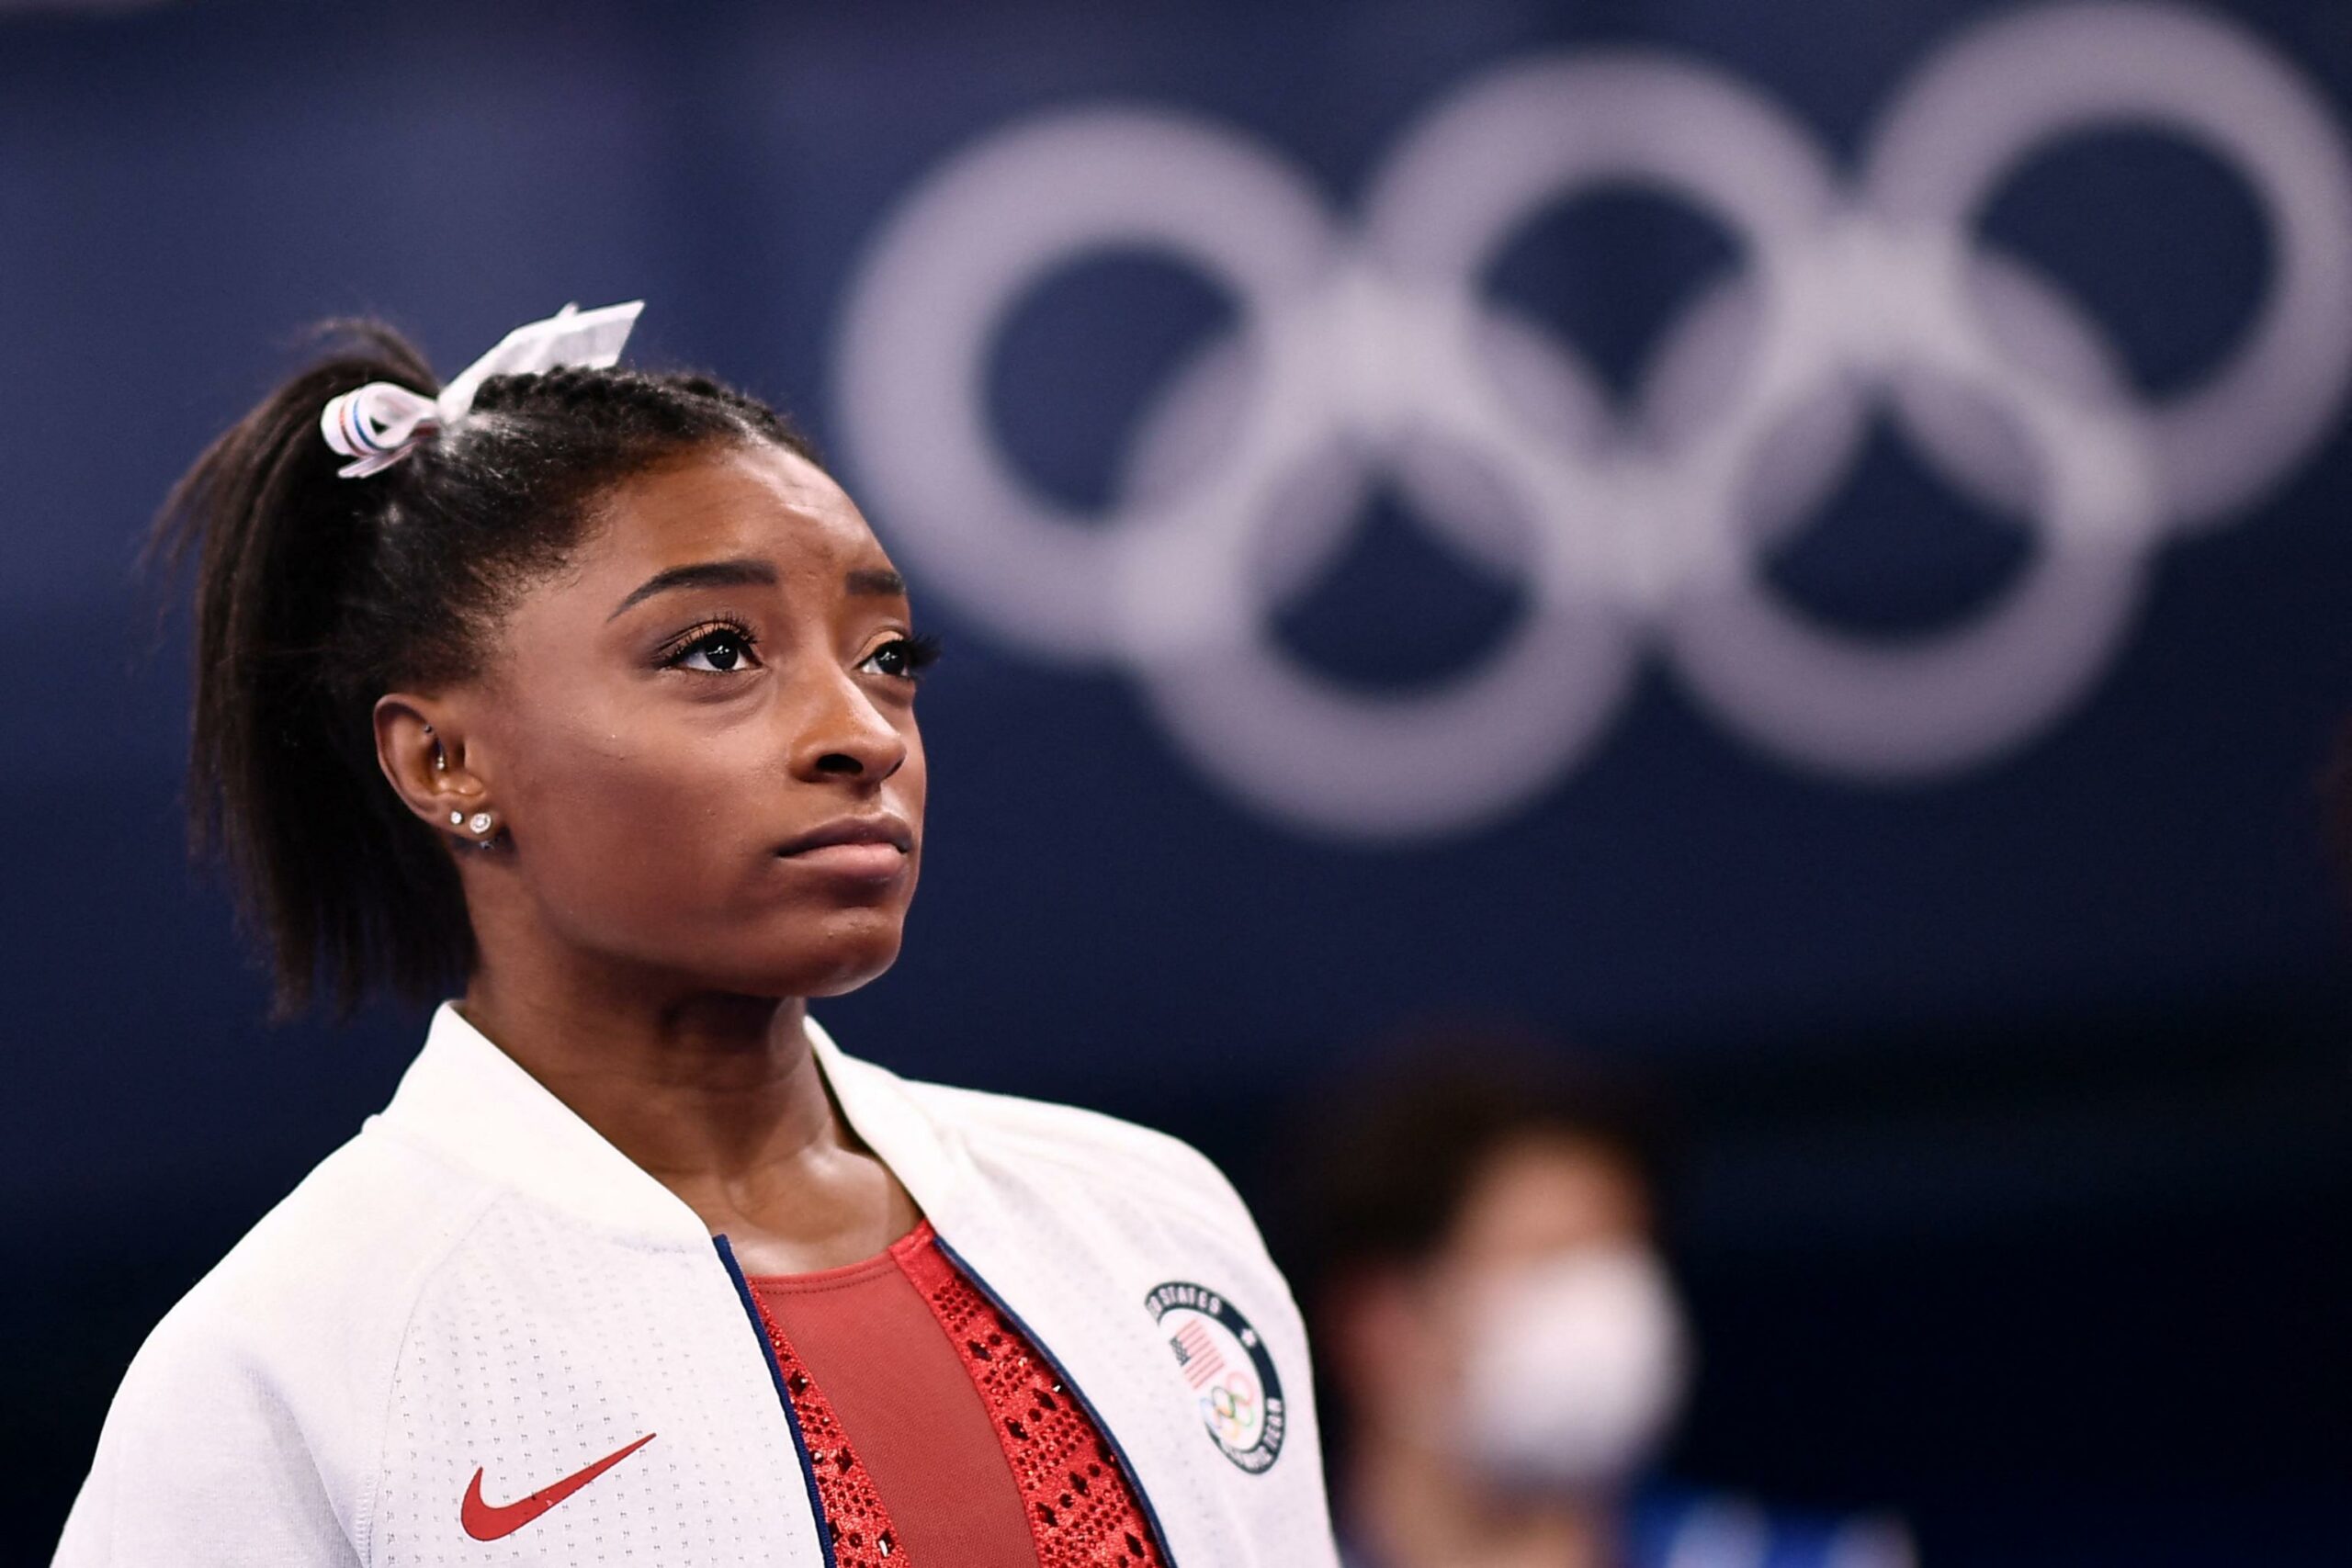 USA's Simone Biles looks on during the artistic gymnastics women's team final during the Tokyo 2020 Olympic Games at the Ariake Gymnastics Centre in Tokyo on July 27, 2021. (Photo by Loic VENANCE / AFP)